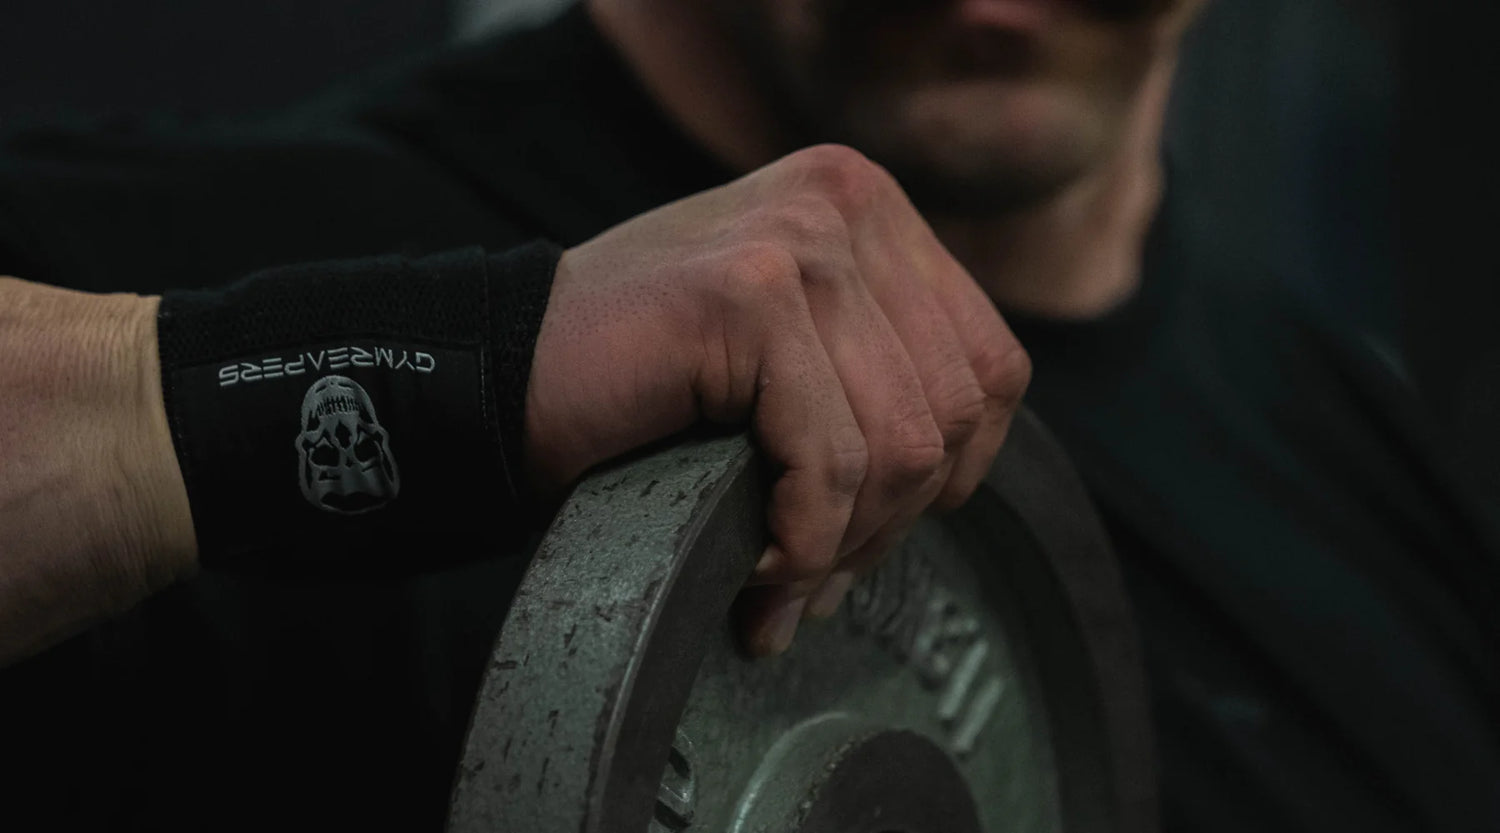 Does Wearing Wrist Wraps Help With Pain While Lifting?